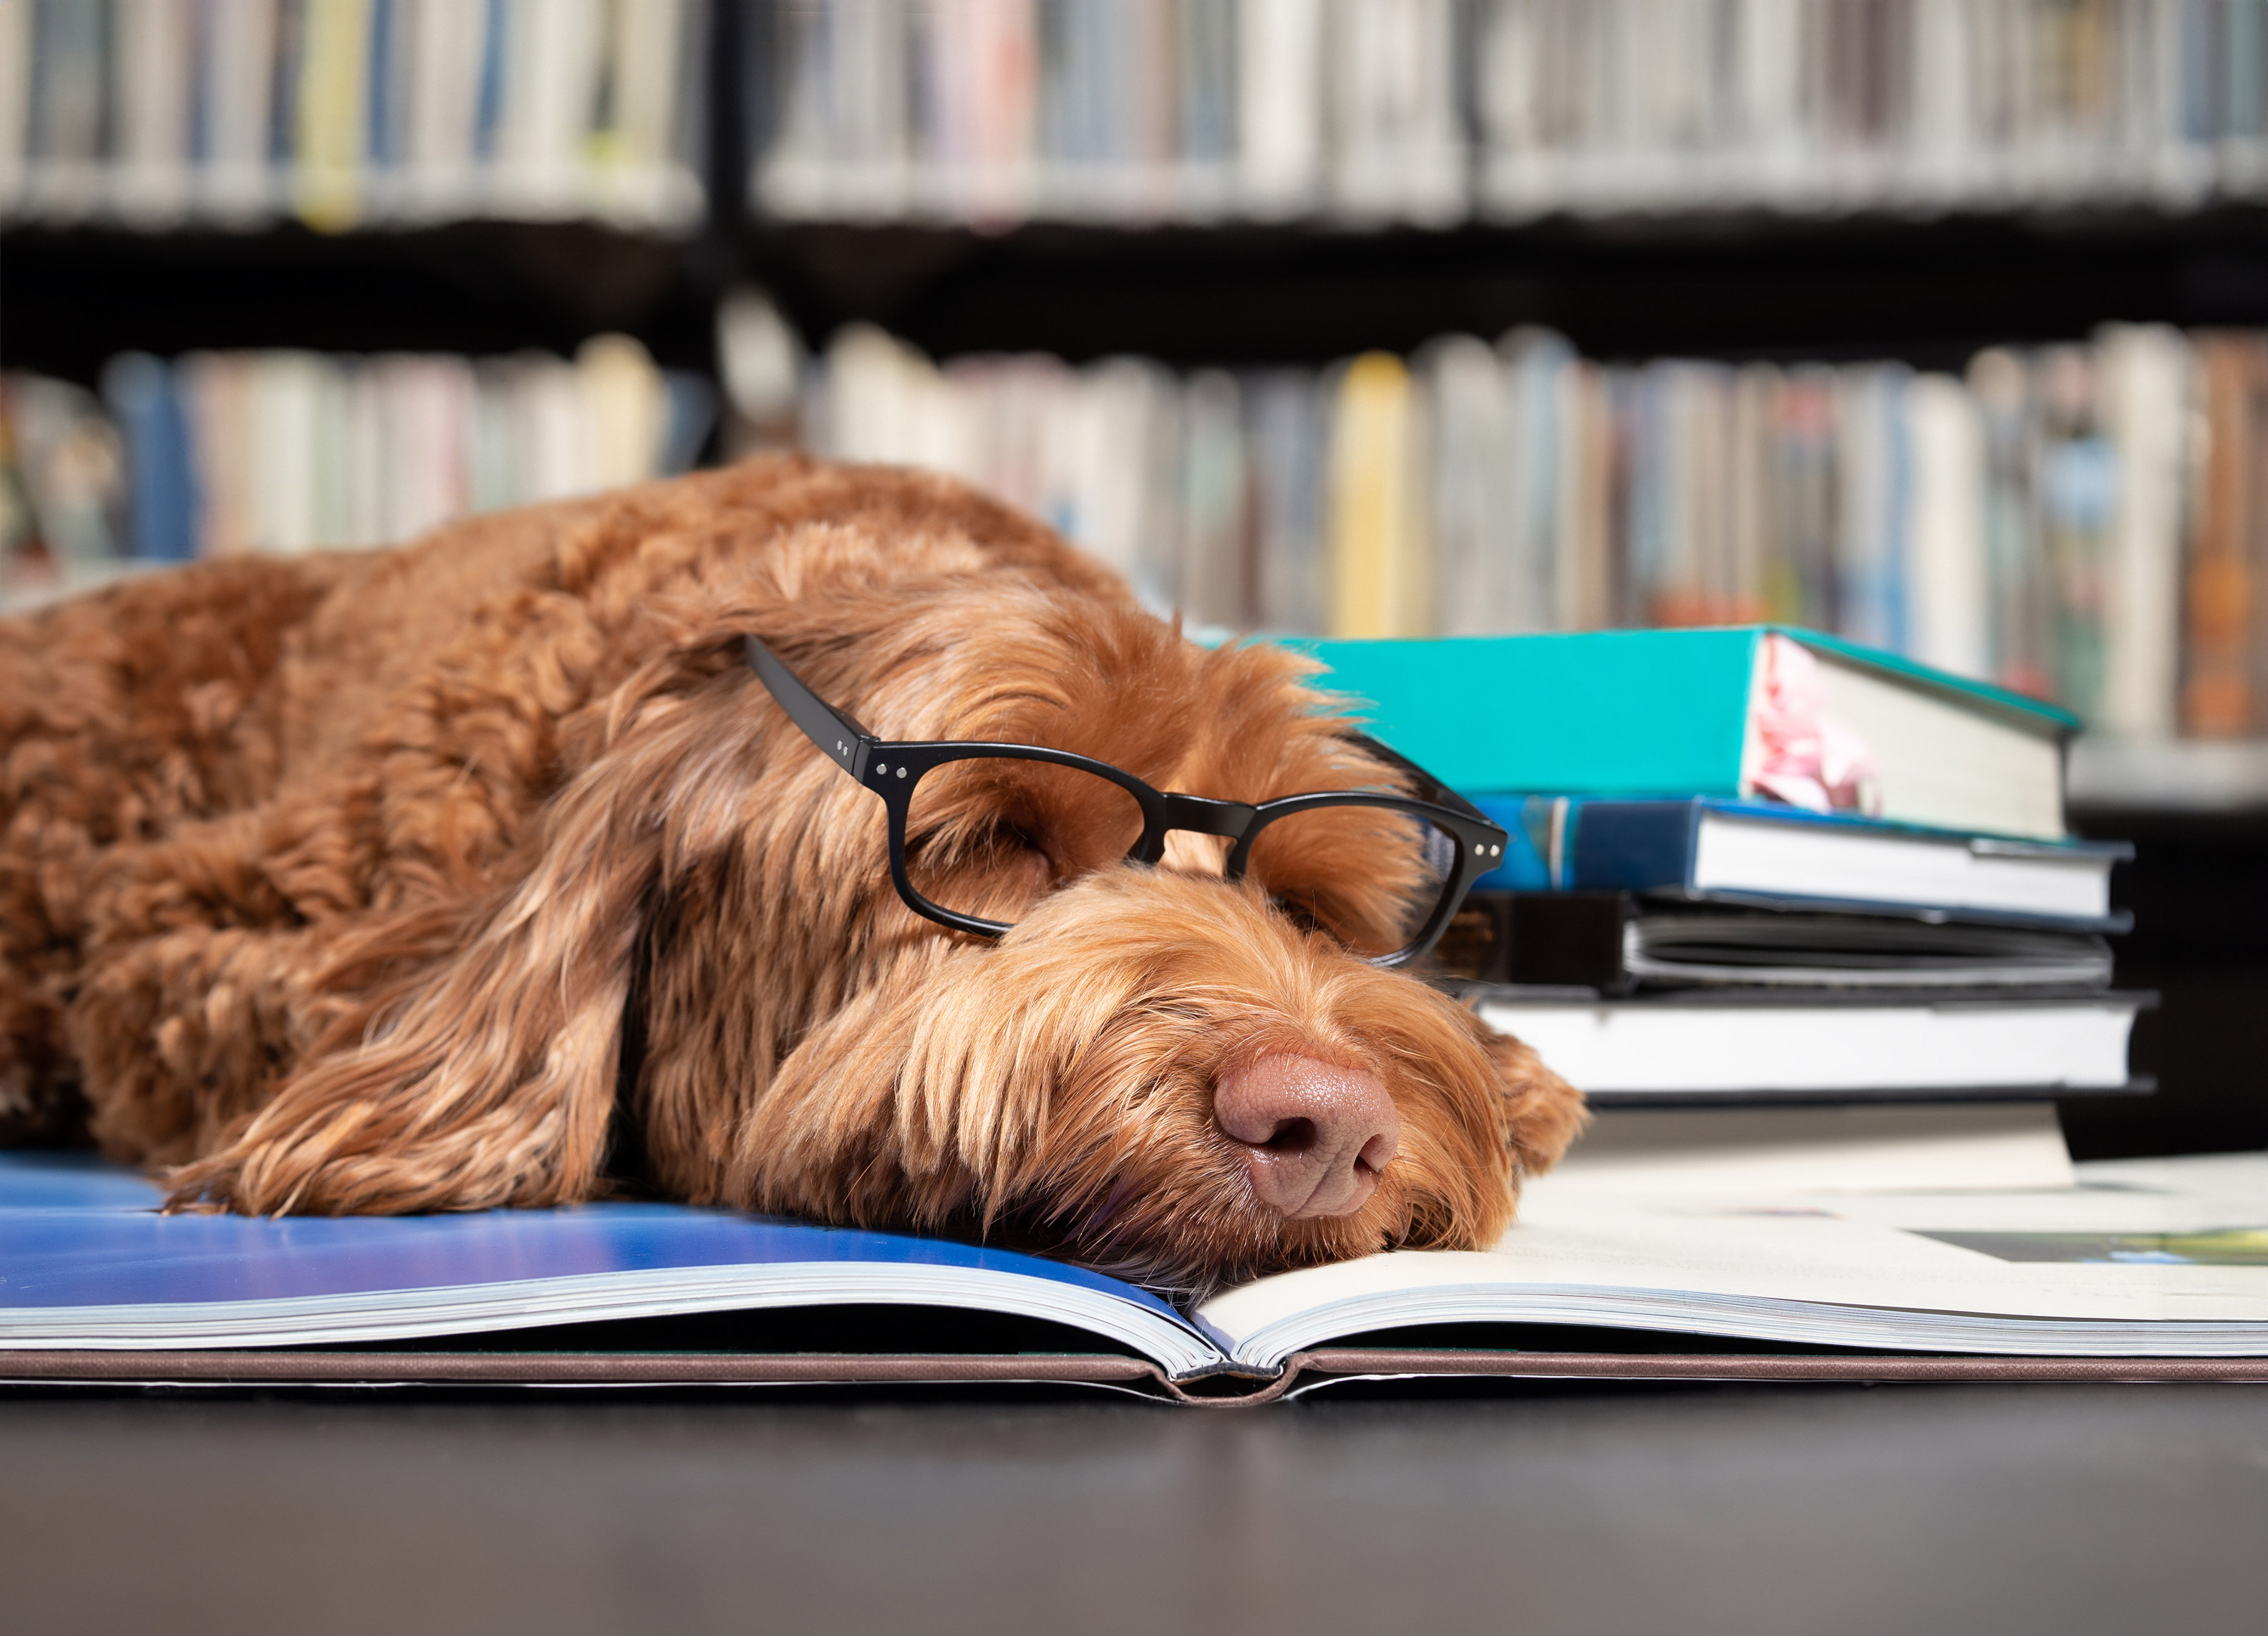 Puppy Studying